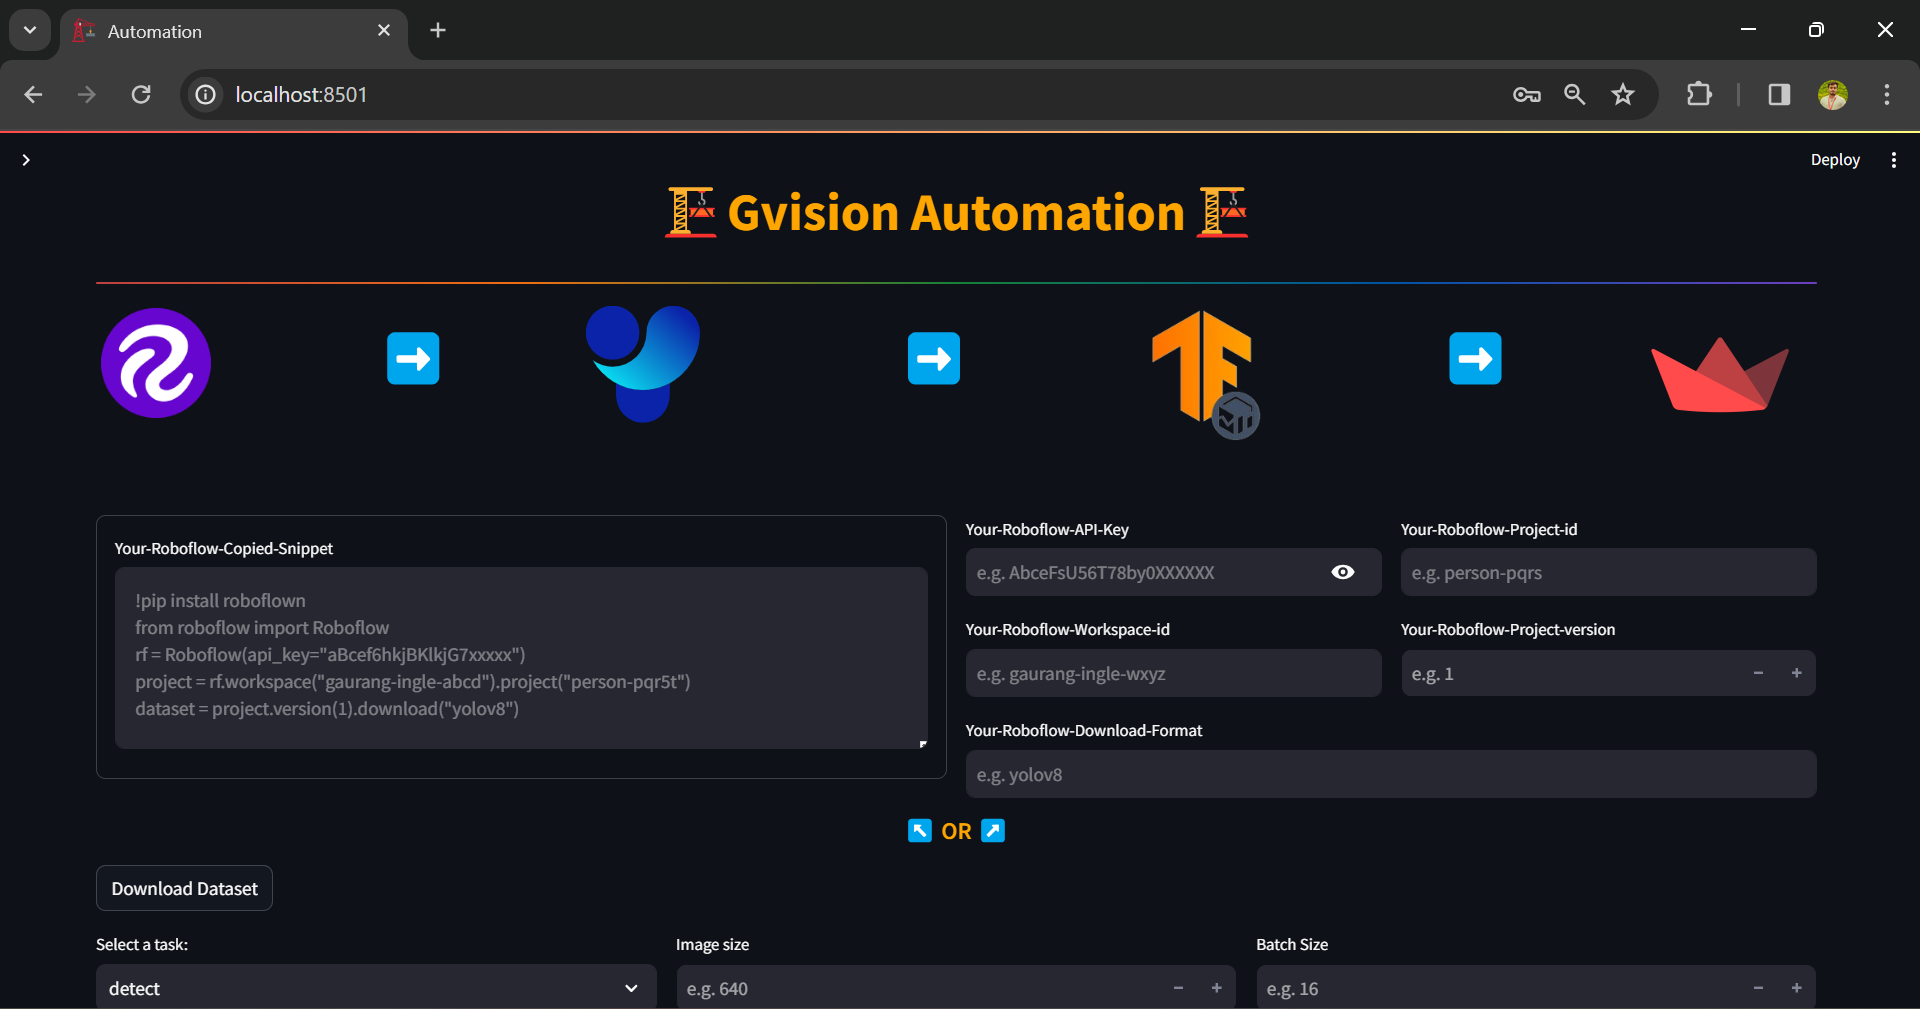 GVISION-AUTOMATION